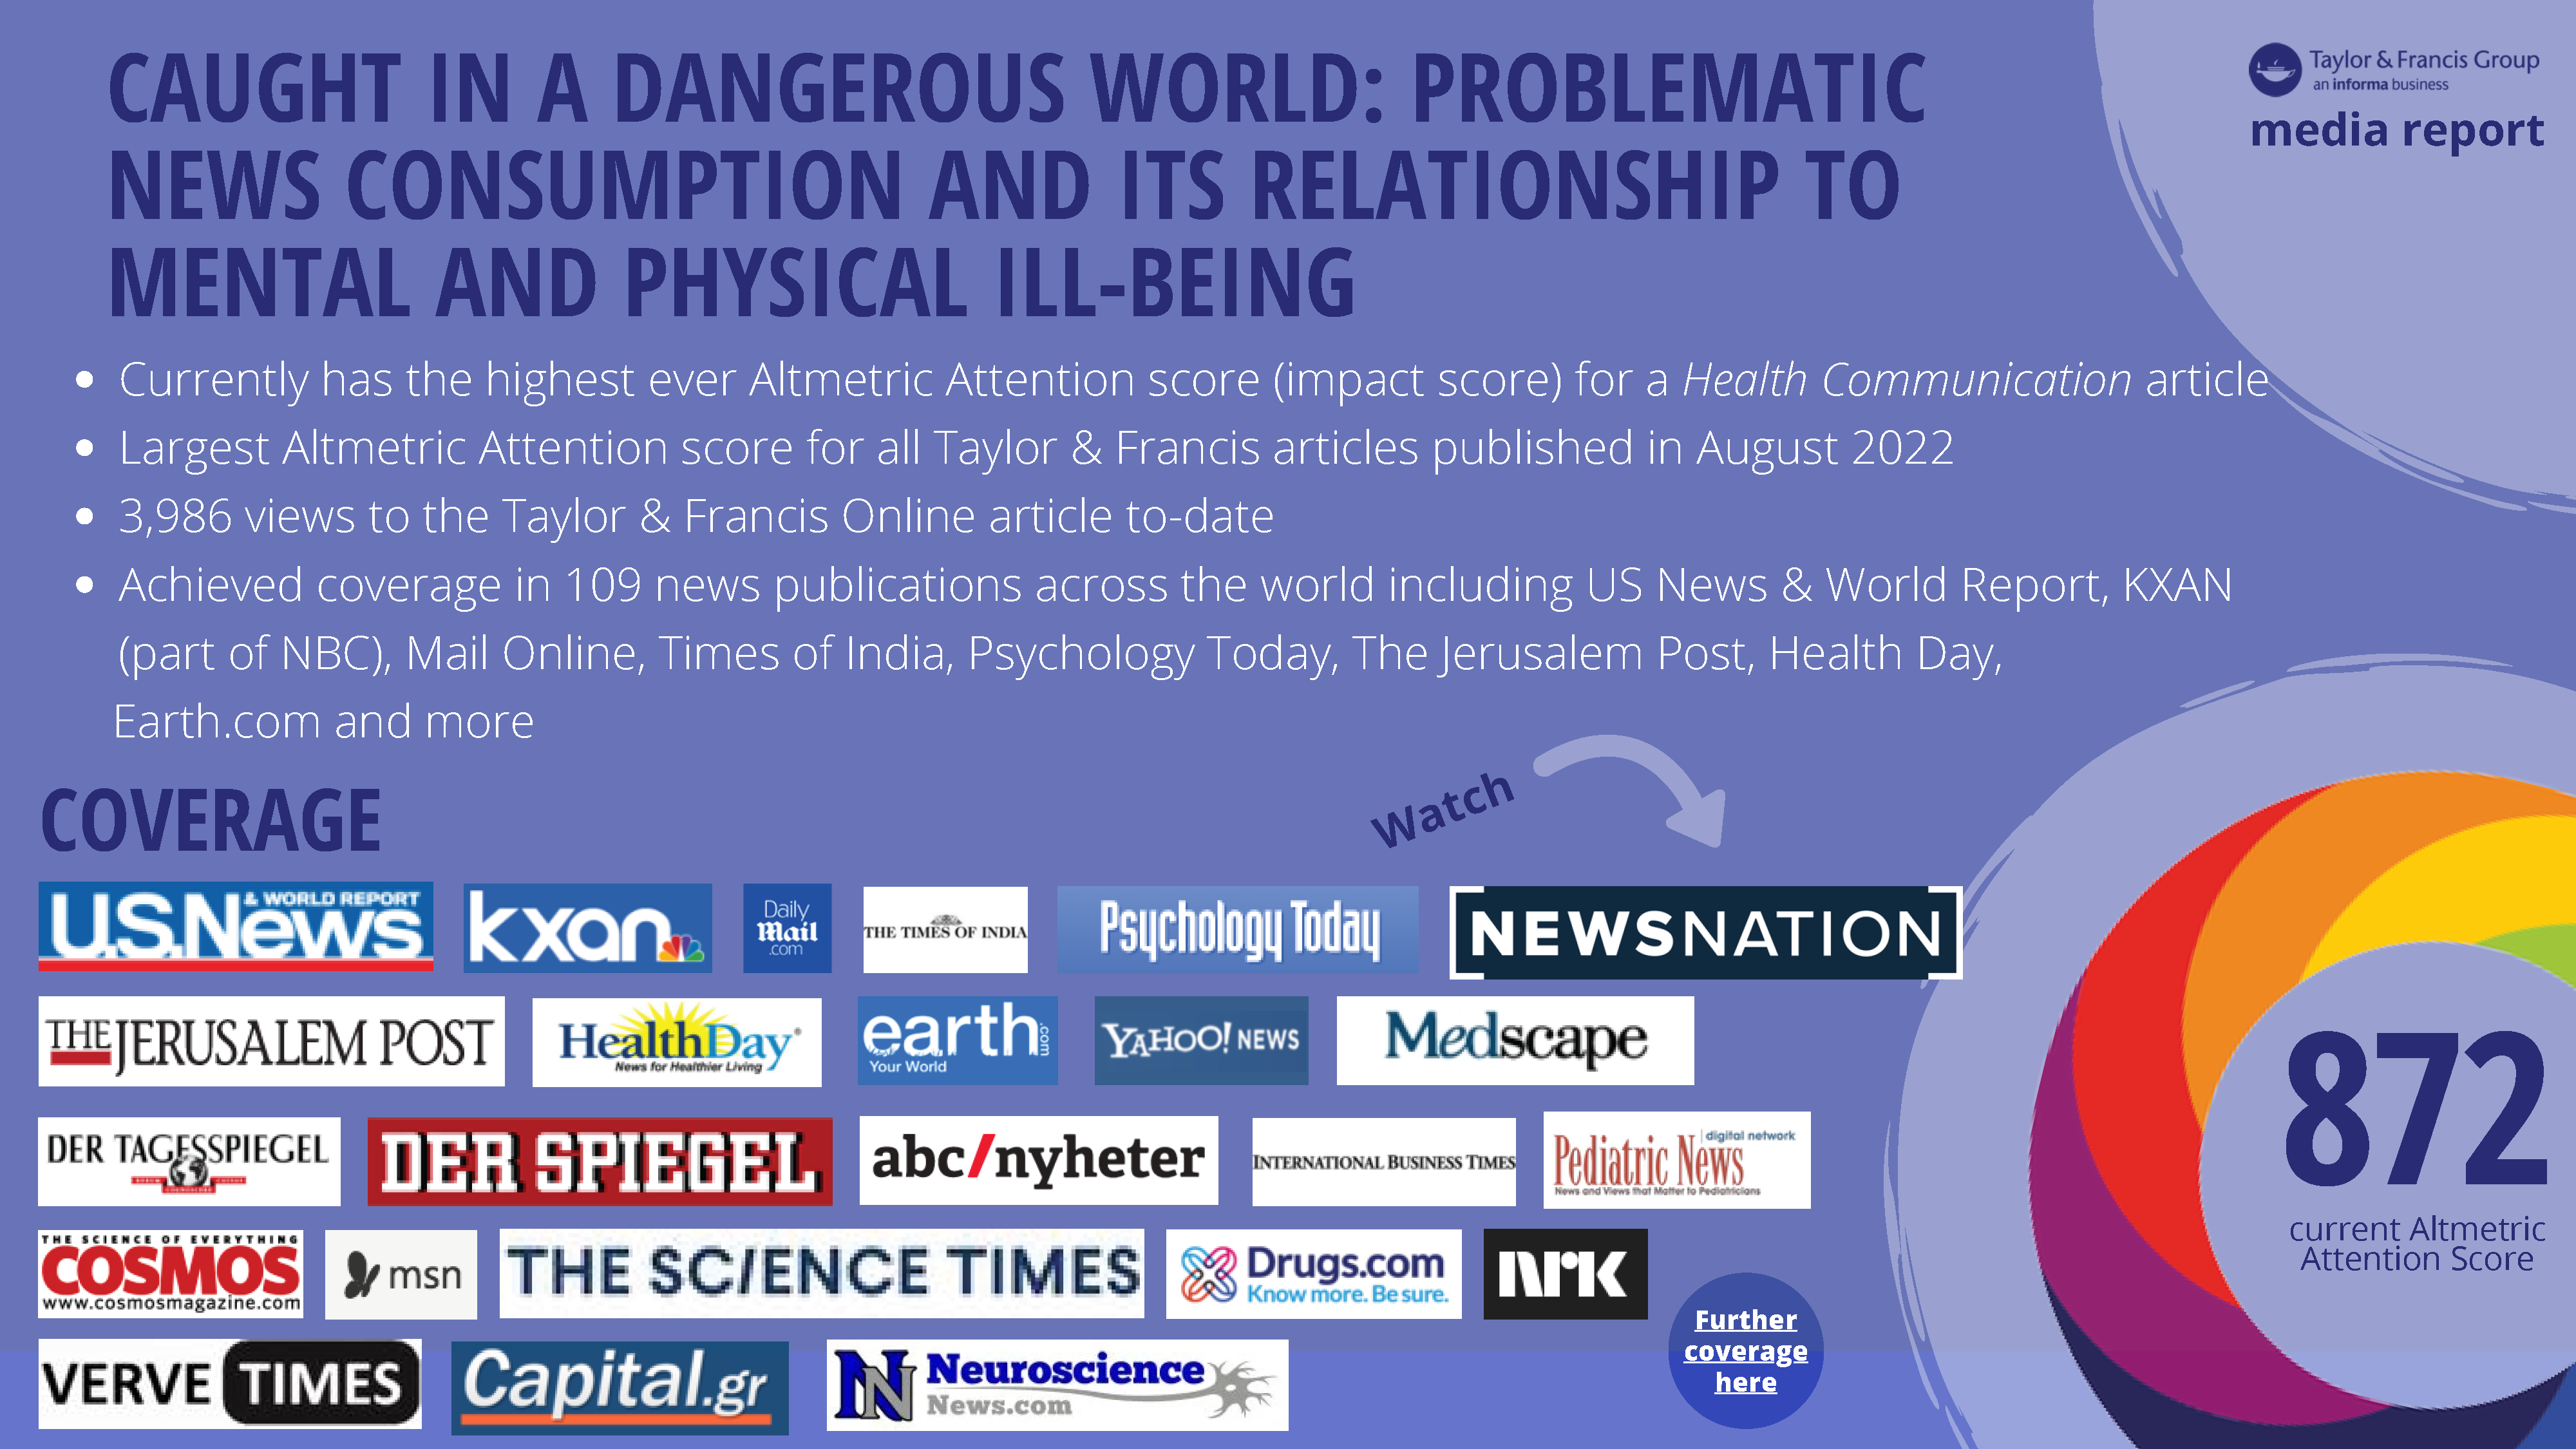 Media report - Caught in a Dangerous World Problematic News Consumption and Its Relationship to Mental and Physical Ill-Being